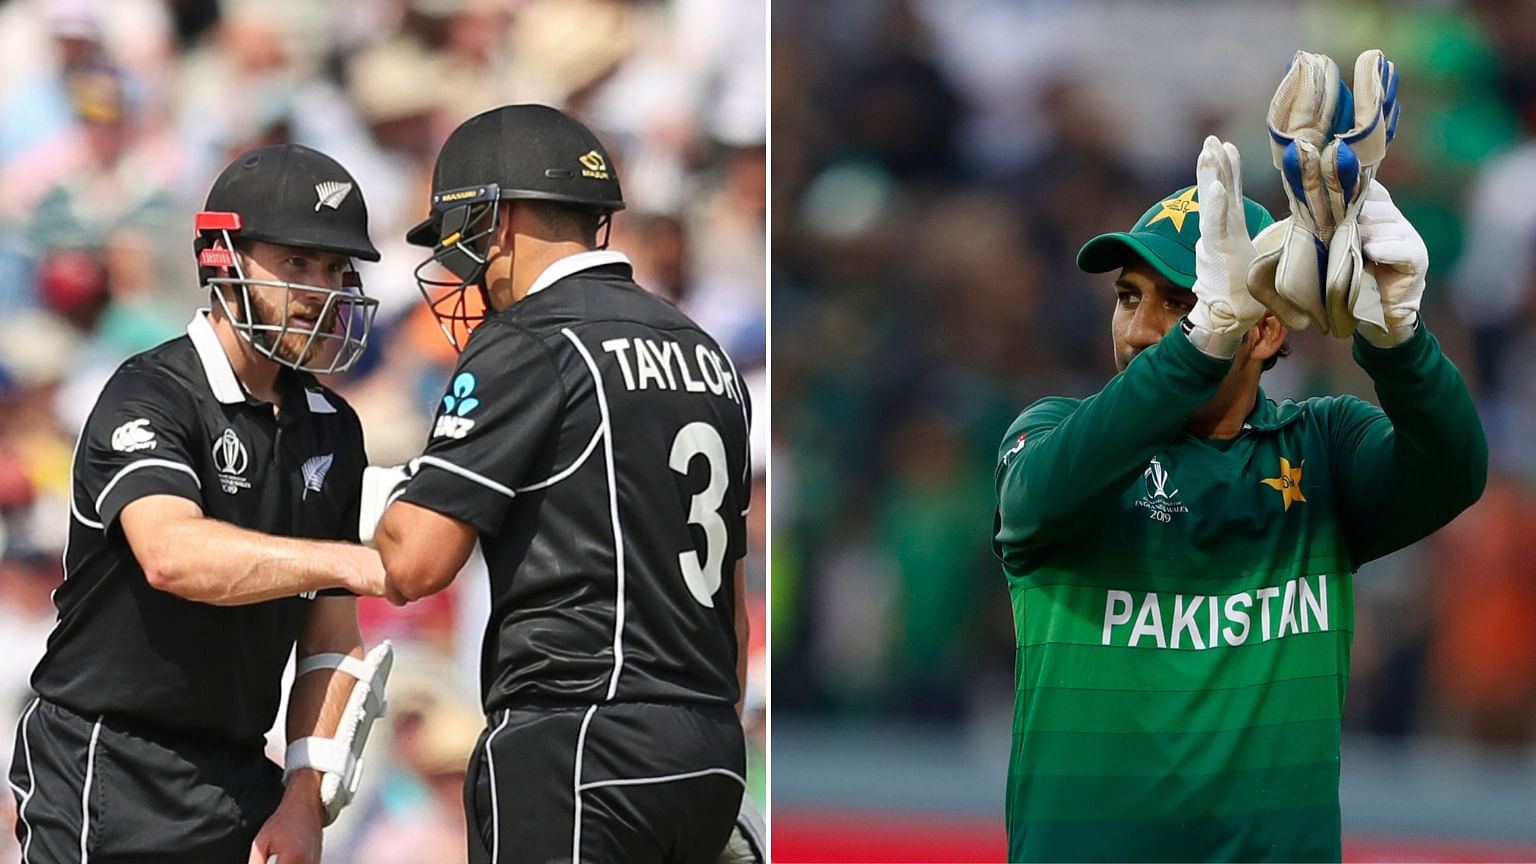 Pakistan will now look to win their remaining three matches, starting with New Zealand.